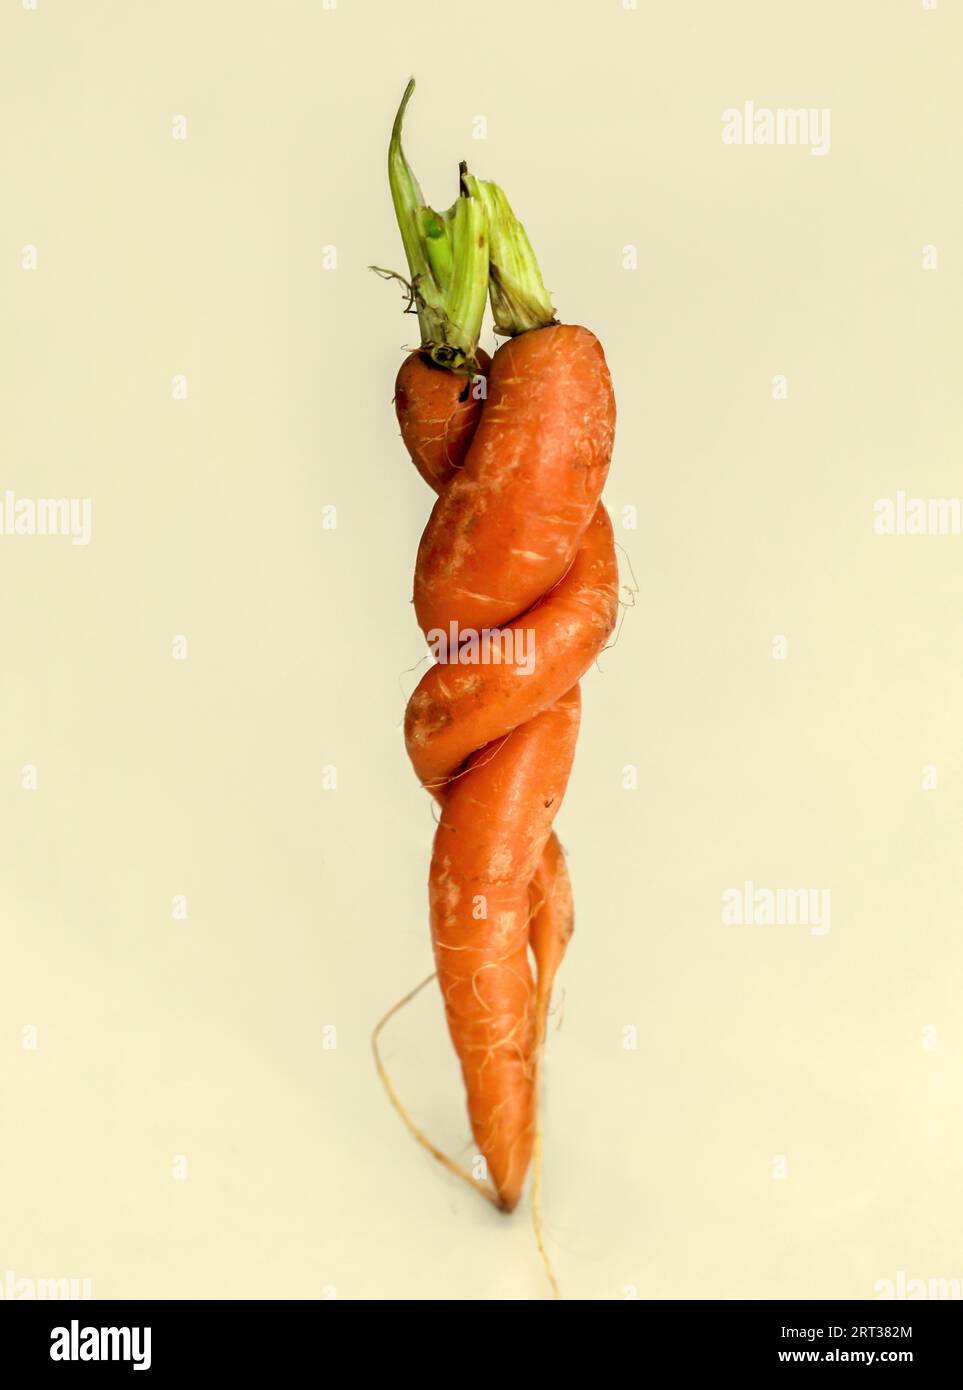 Two specially shaped carrots. Two embraced carrots on a yellowish background Stock Photo